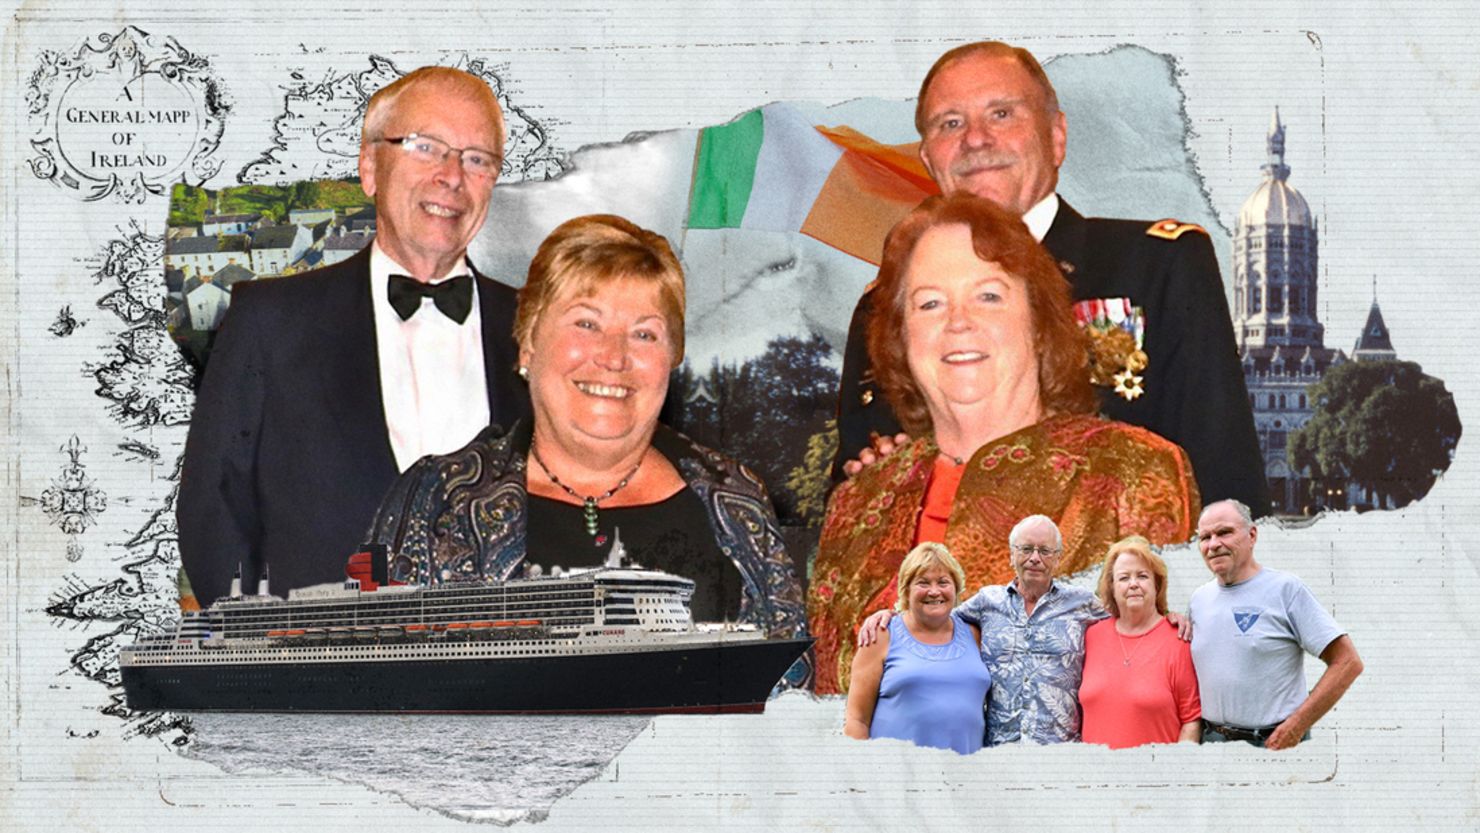 Paddy and Hazel (left) met Eileen and Gerard (right) on a cruise ship. It turned out Paddy, from Ireland, and Eileen, from the US, were long lost cousins.